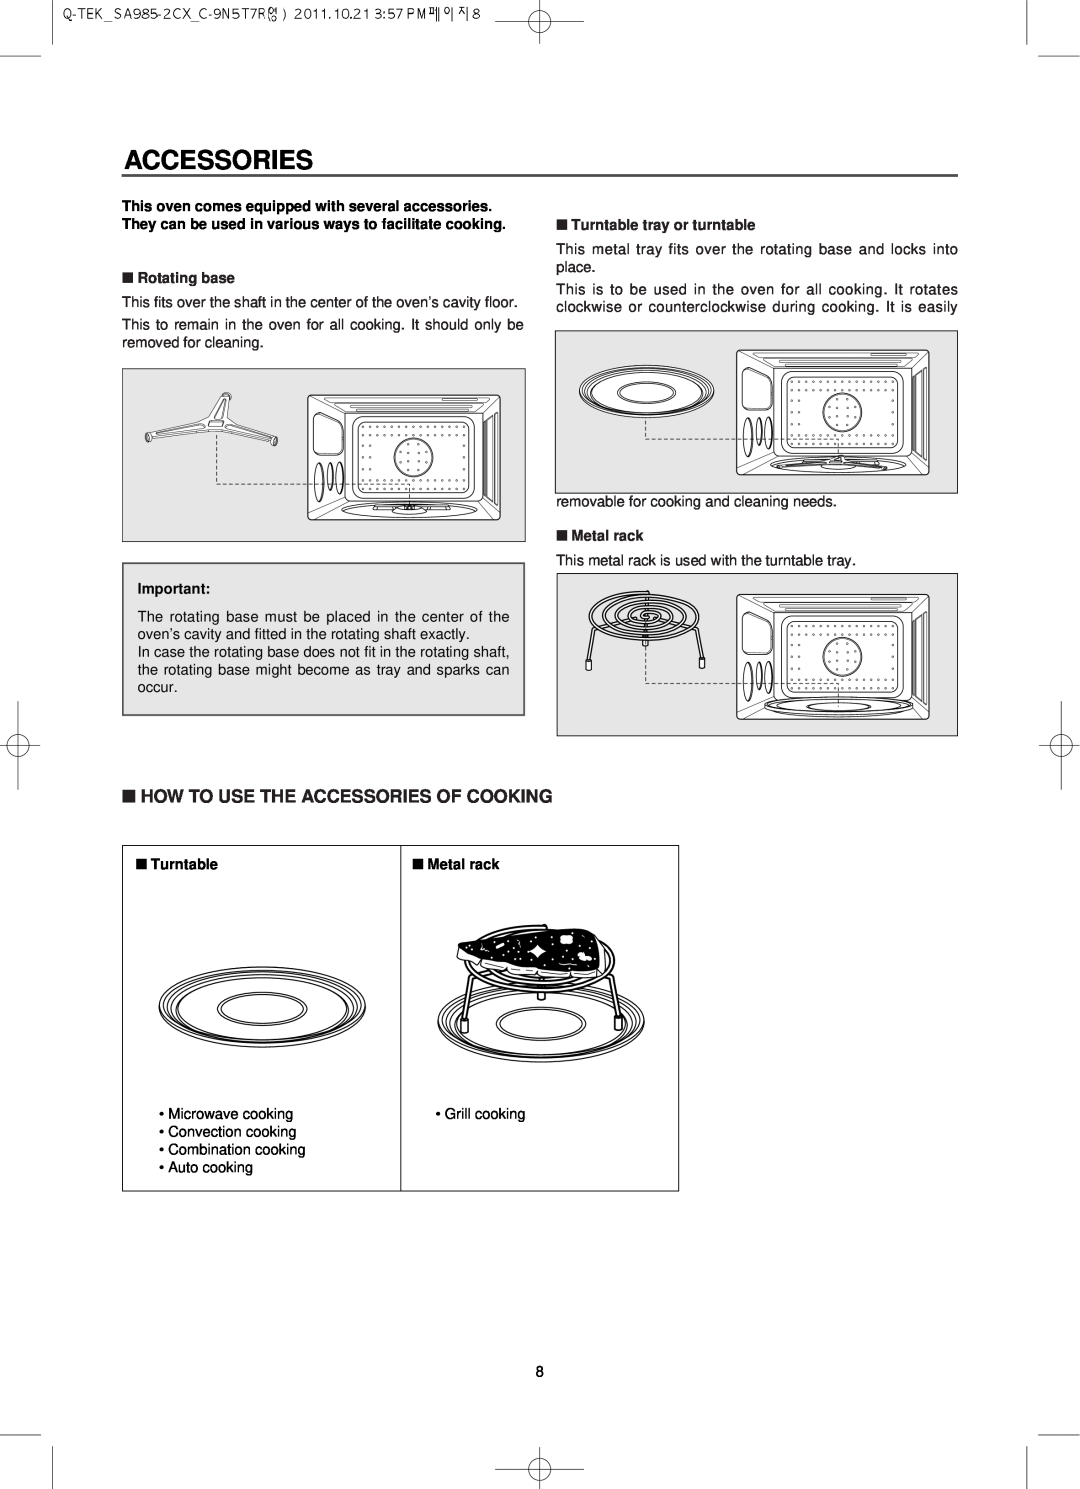 Smeg SA985-2CX How To Use The Accessories Of Cooking, Rotating base, Turntable tray or turntable, Metal rack 